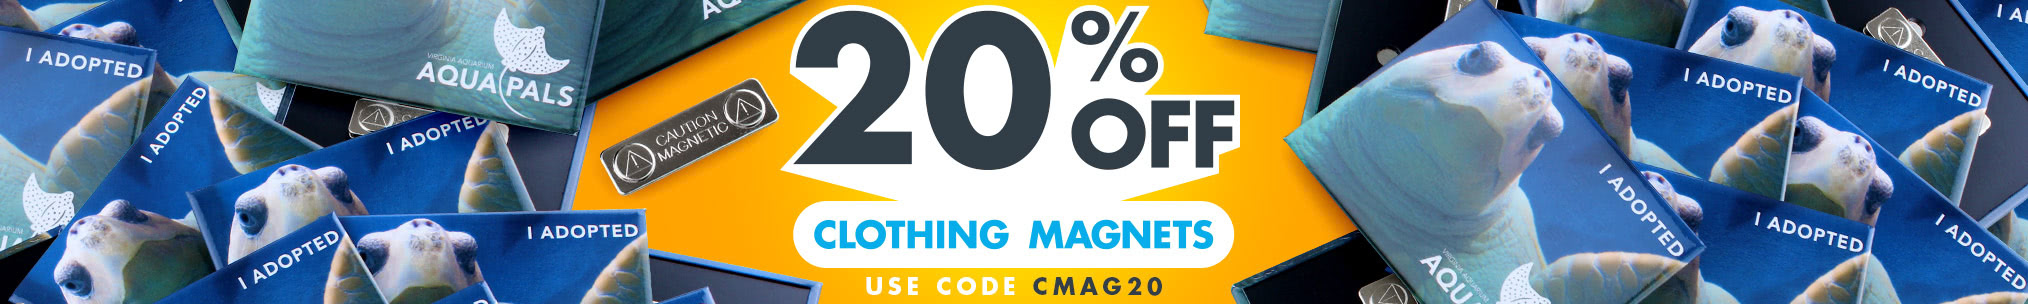 20% OFF Clothing Magnets with code CMAG20